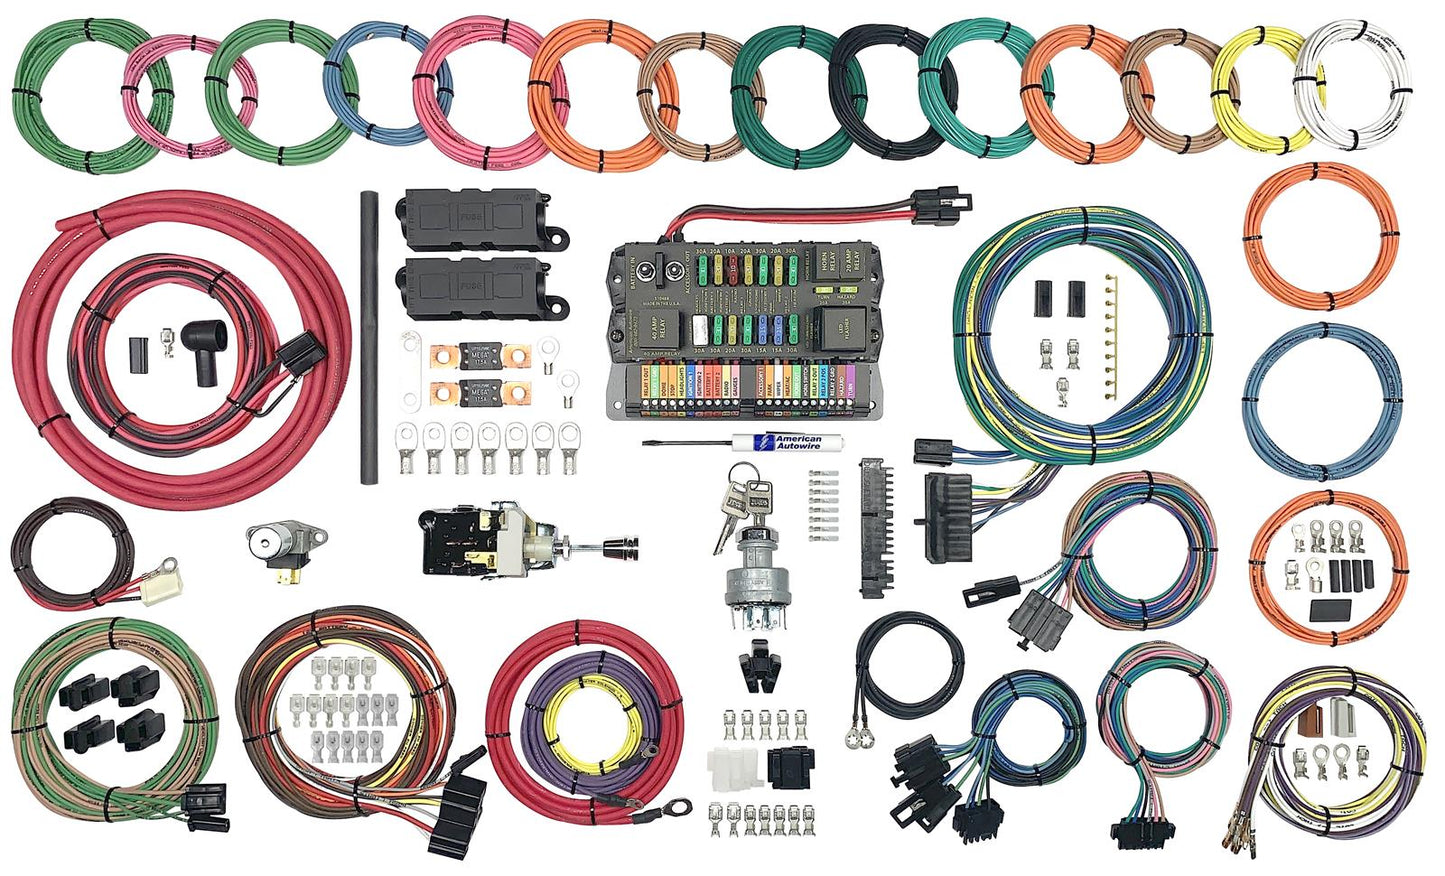 American Autowire Highway 22 Plus Wiring Harness Kits 510760 - Universal